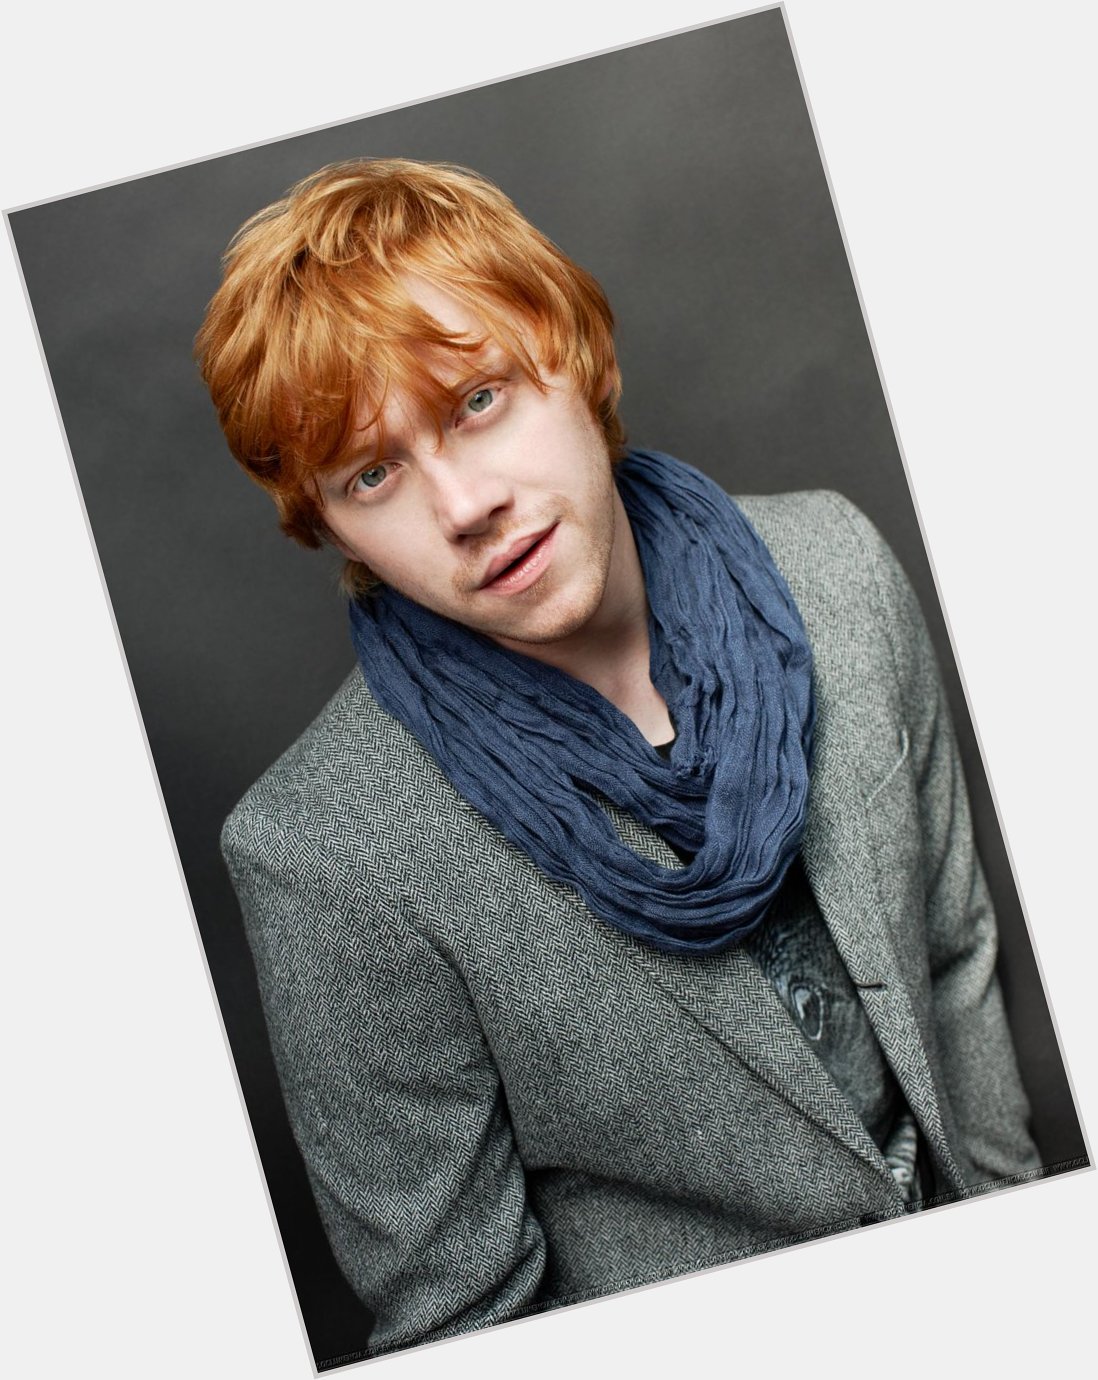 Rupert Grint who plays Ron Weasley in the Harry Potter franchise is turning 27 today! Happy Birthday to him. 